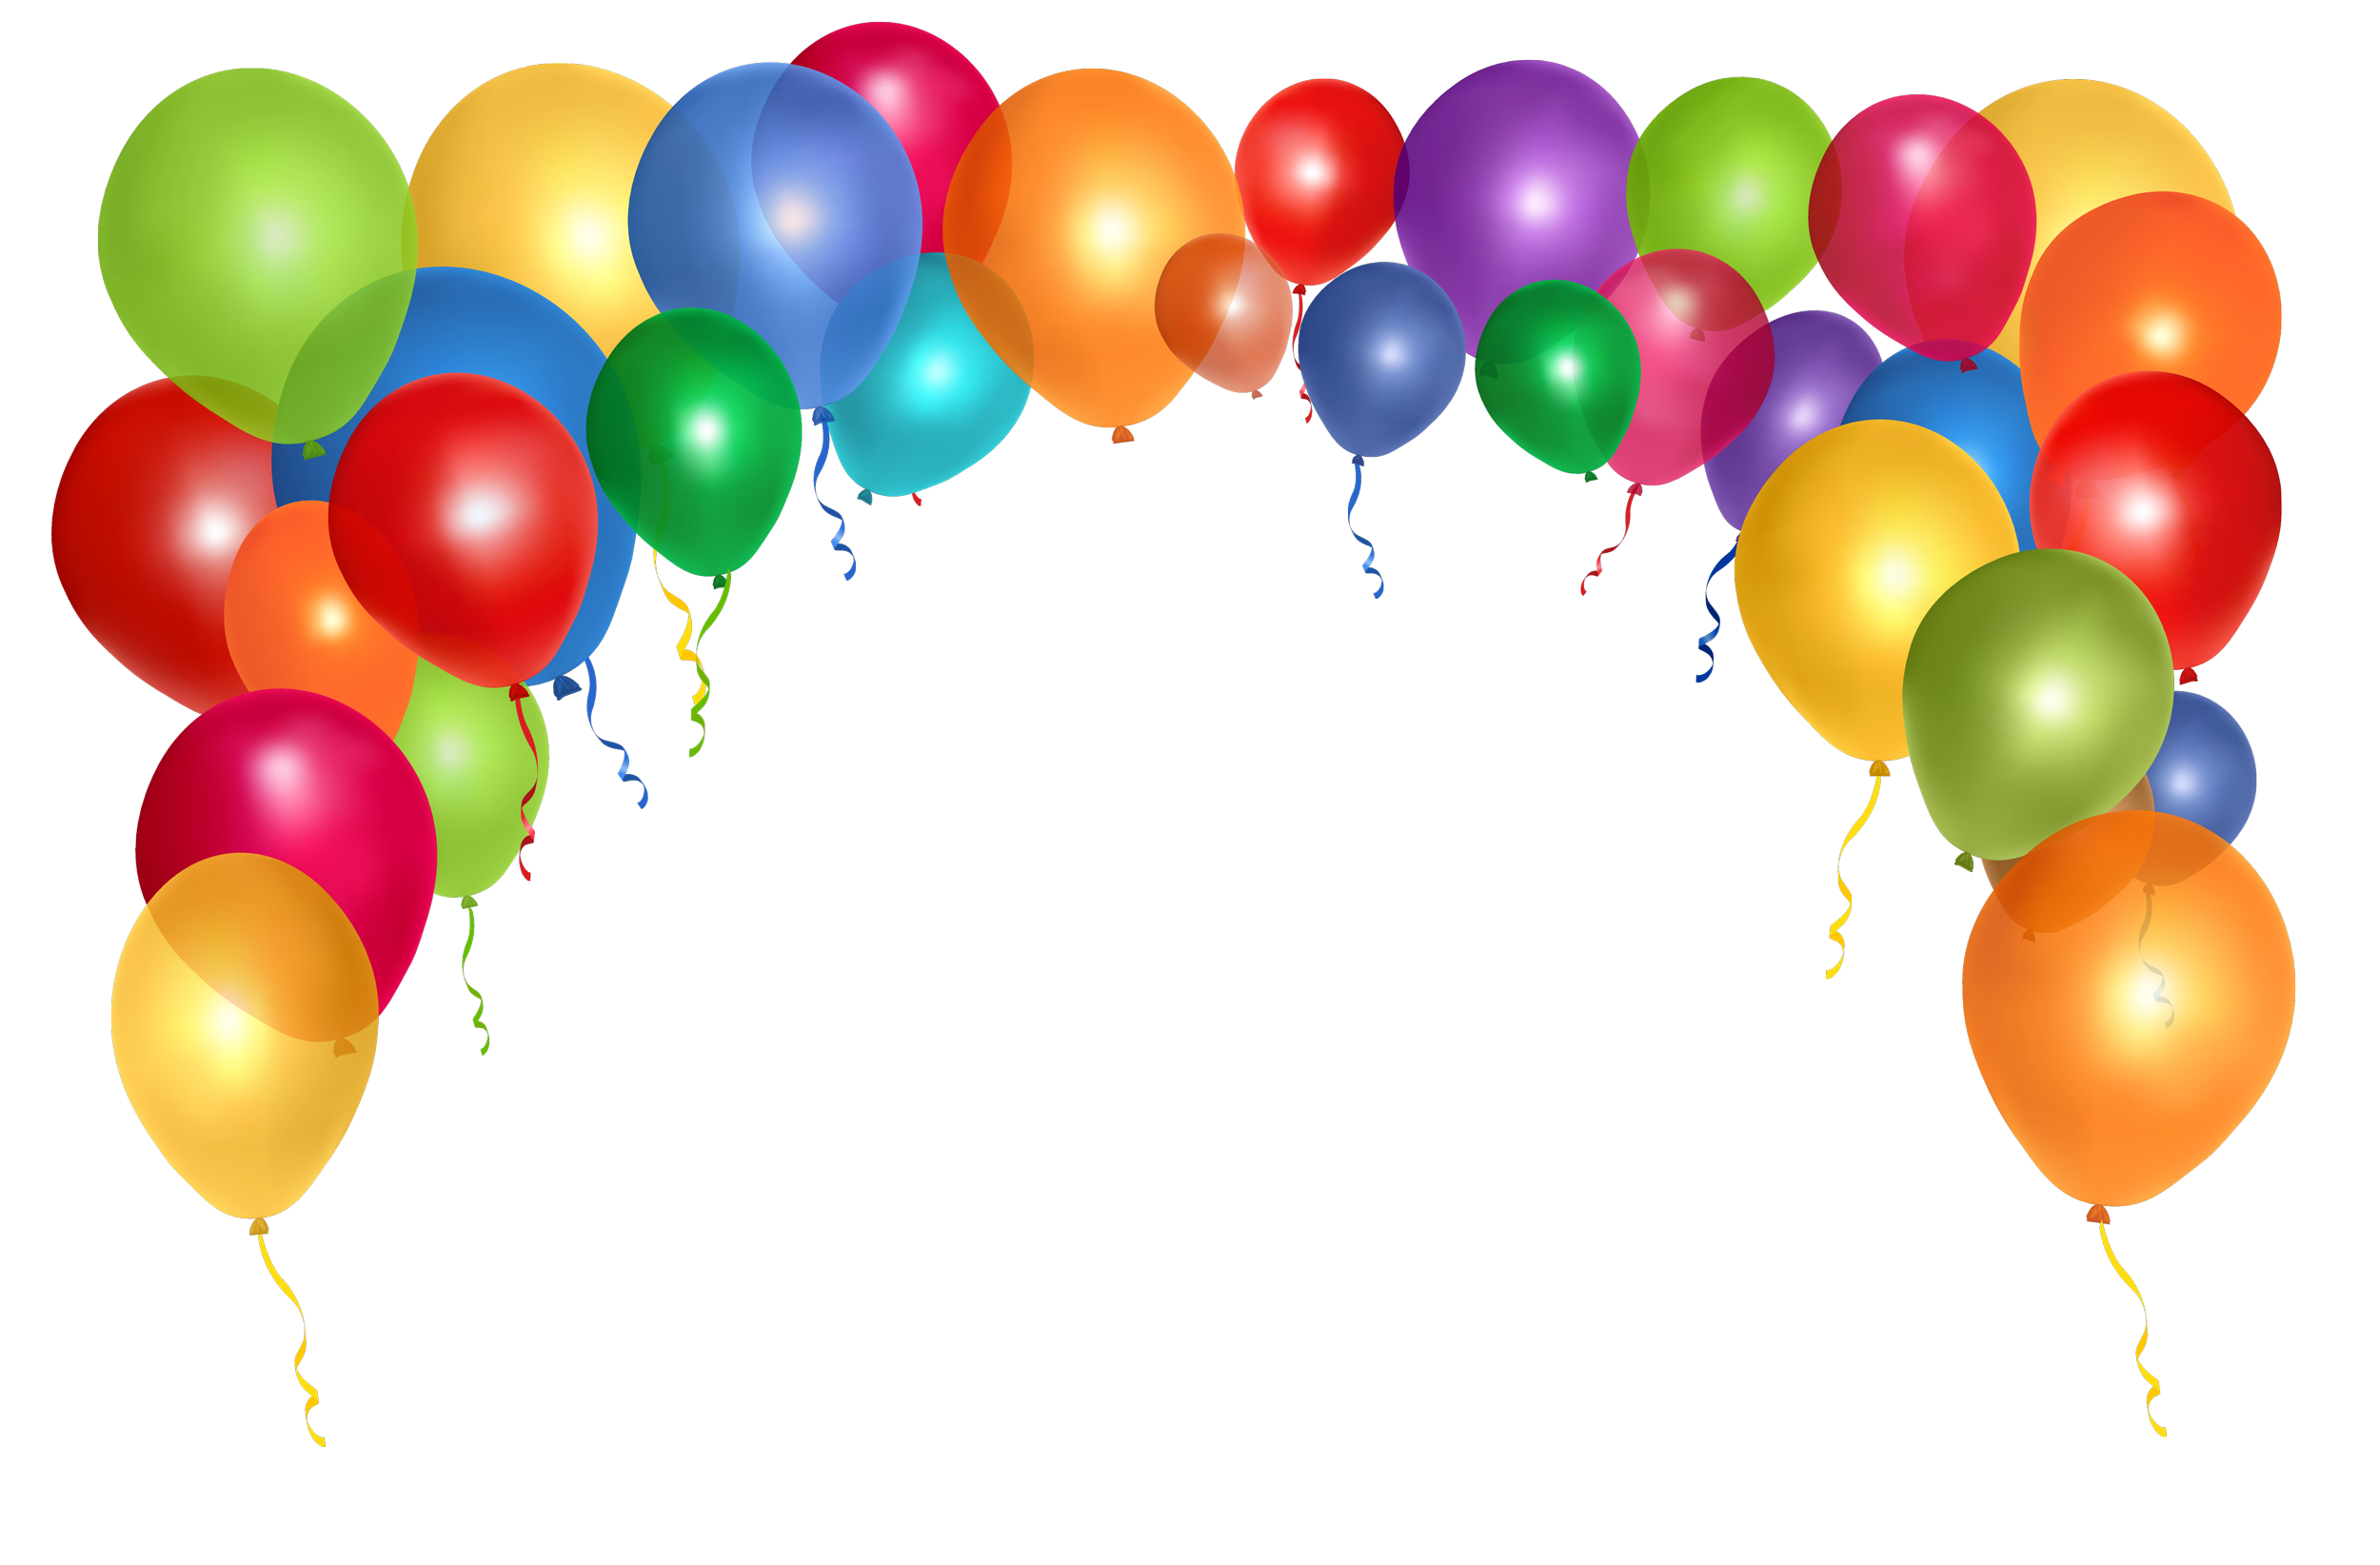 Balloons PNG image